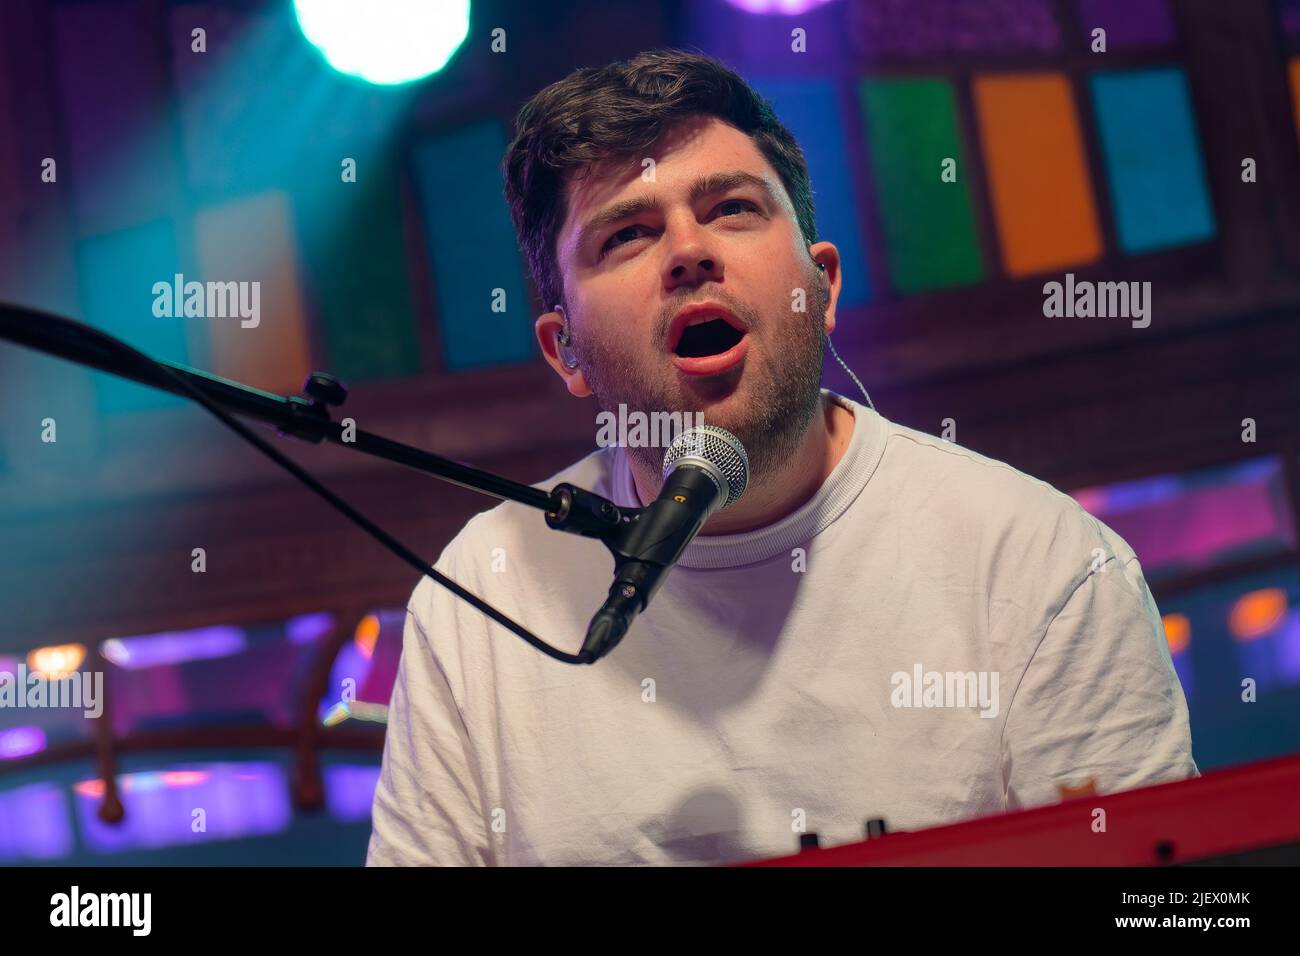 Bergen, Norway. 14th, June 2022. The Scottish folk band Tide Lines performs a live concert during the Norwegian music festival Bergenfest 2022 in Bergen. Here musician Ross Wilson is seen live on stage. (Photo credit: Gonzales Photo - Jarle H. Moe). Stock Photo